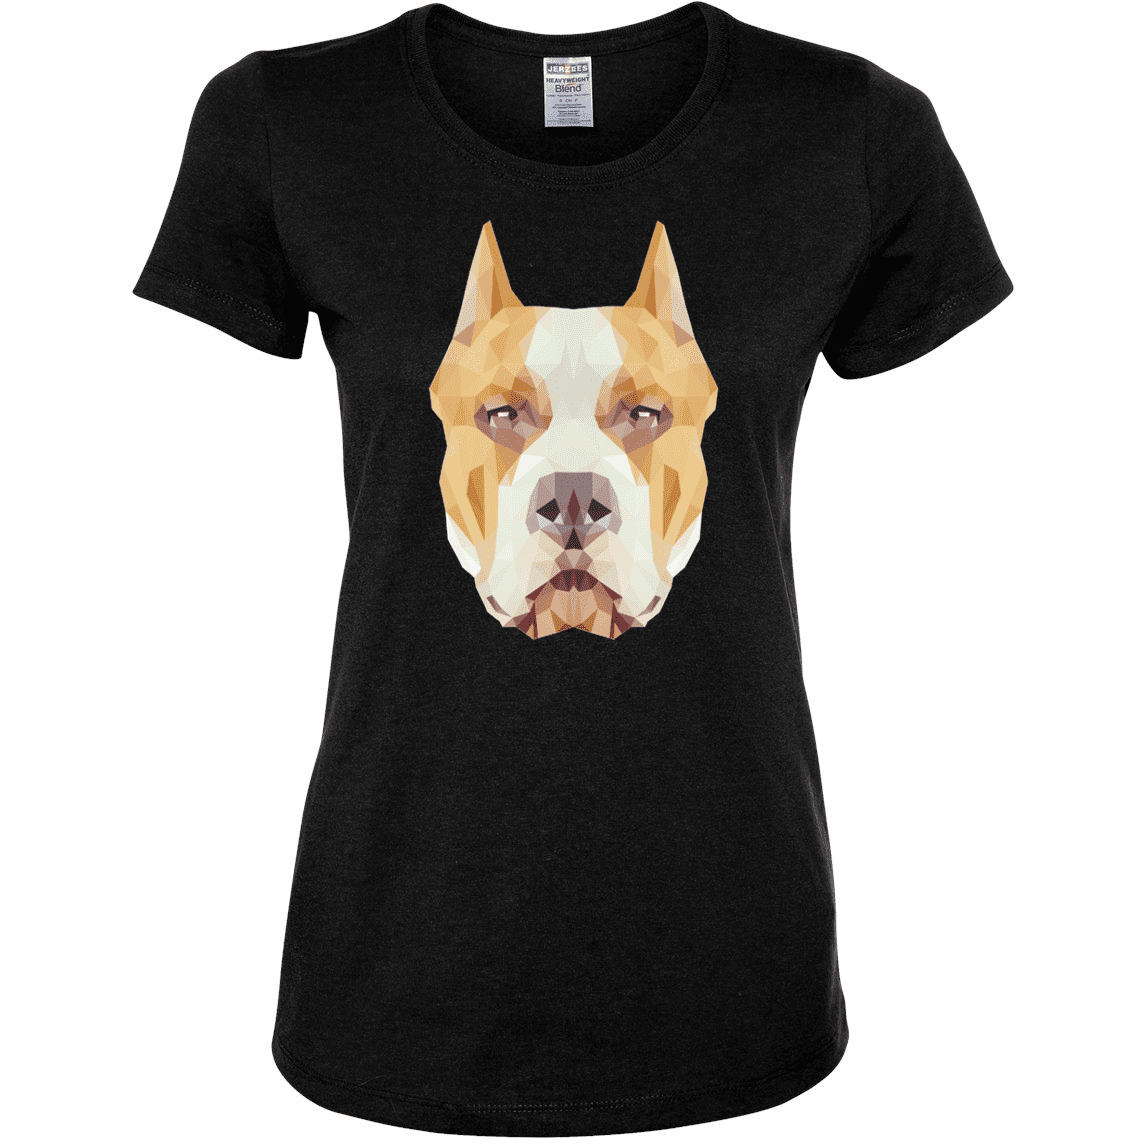 Women Boots Pit bull Terrier BOOTS Custom Picture American Staffordshire Terrier lovers Animal lovers